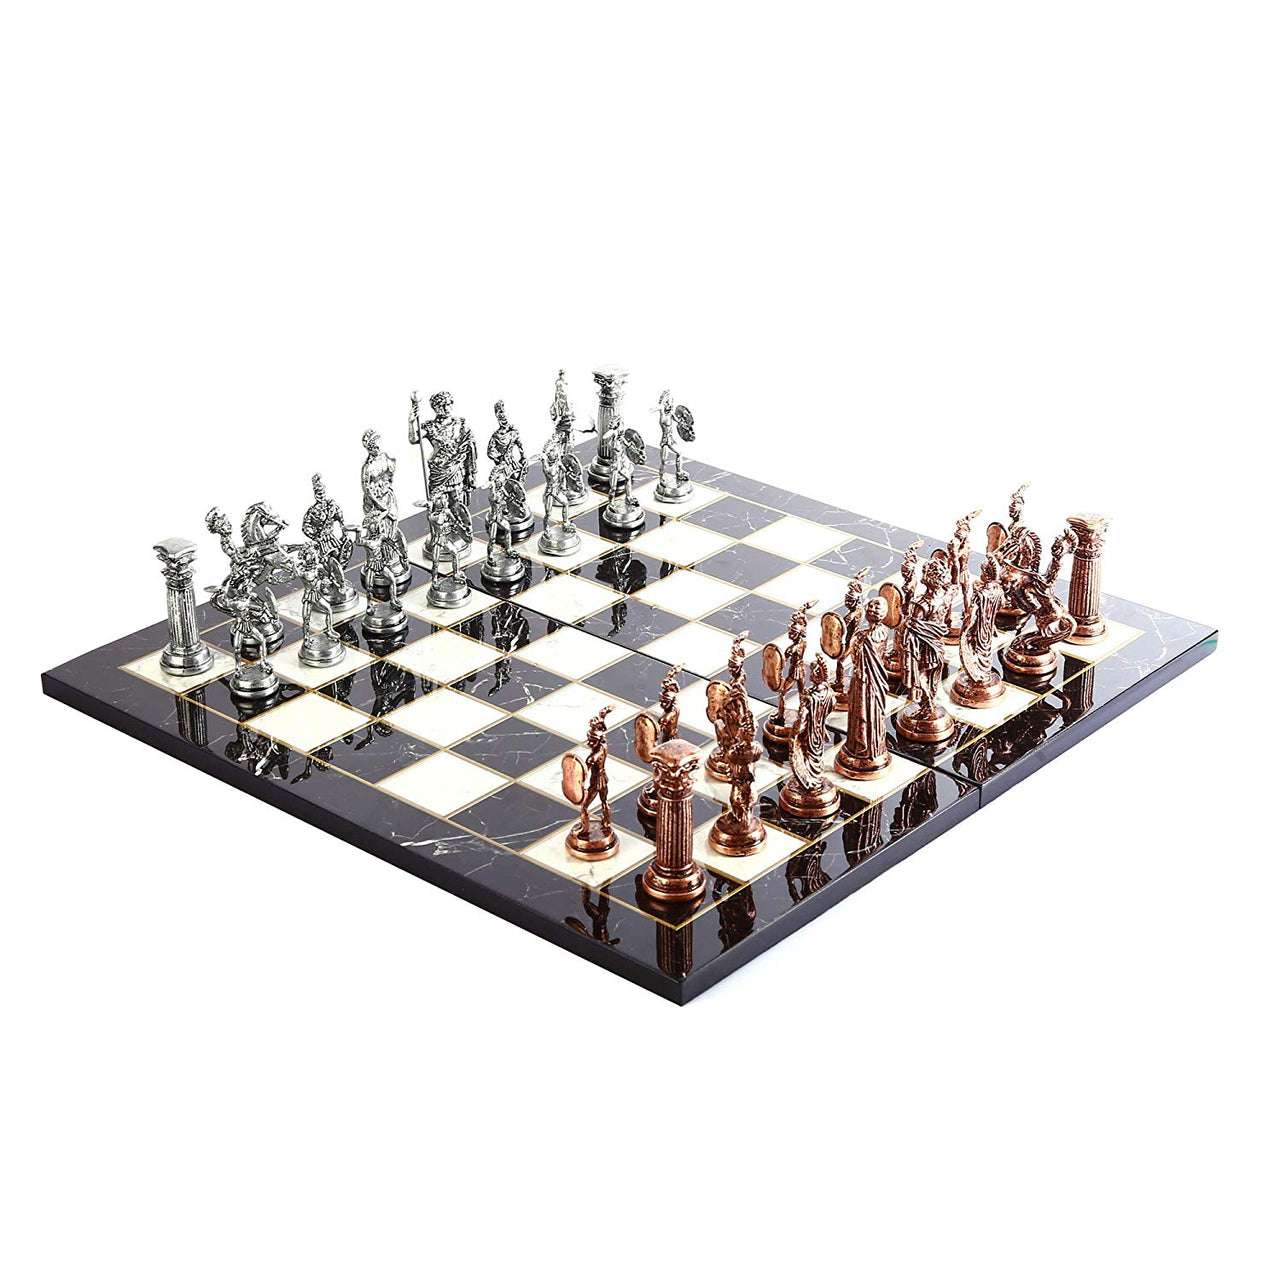 Copper Rome Figures Metal Chess Set with Marble Design Wood Chess Board Sculptures and Statues